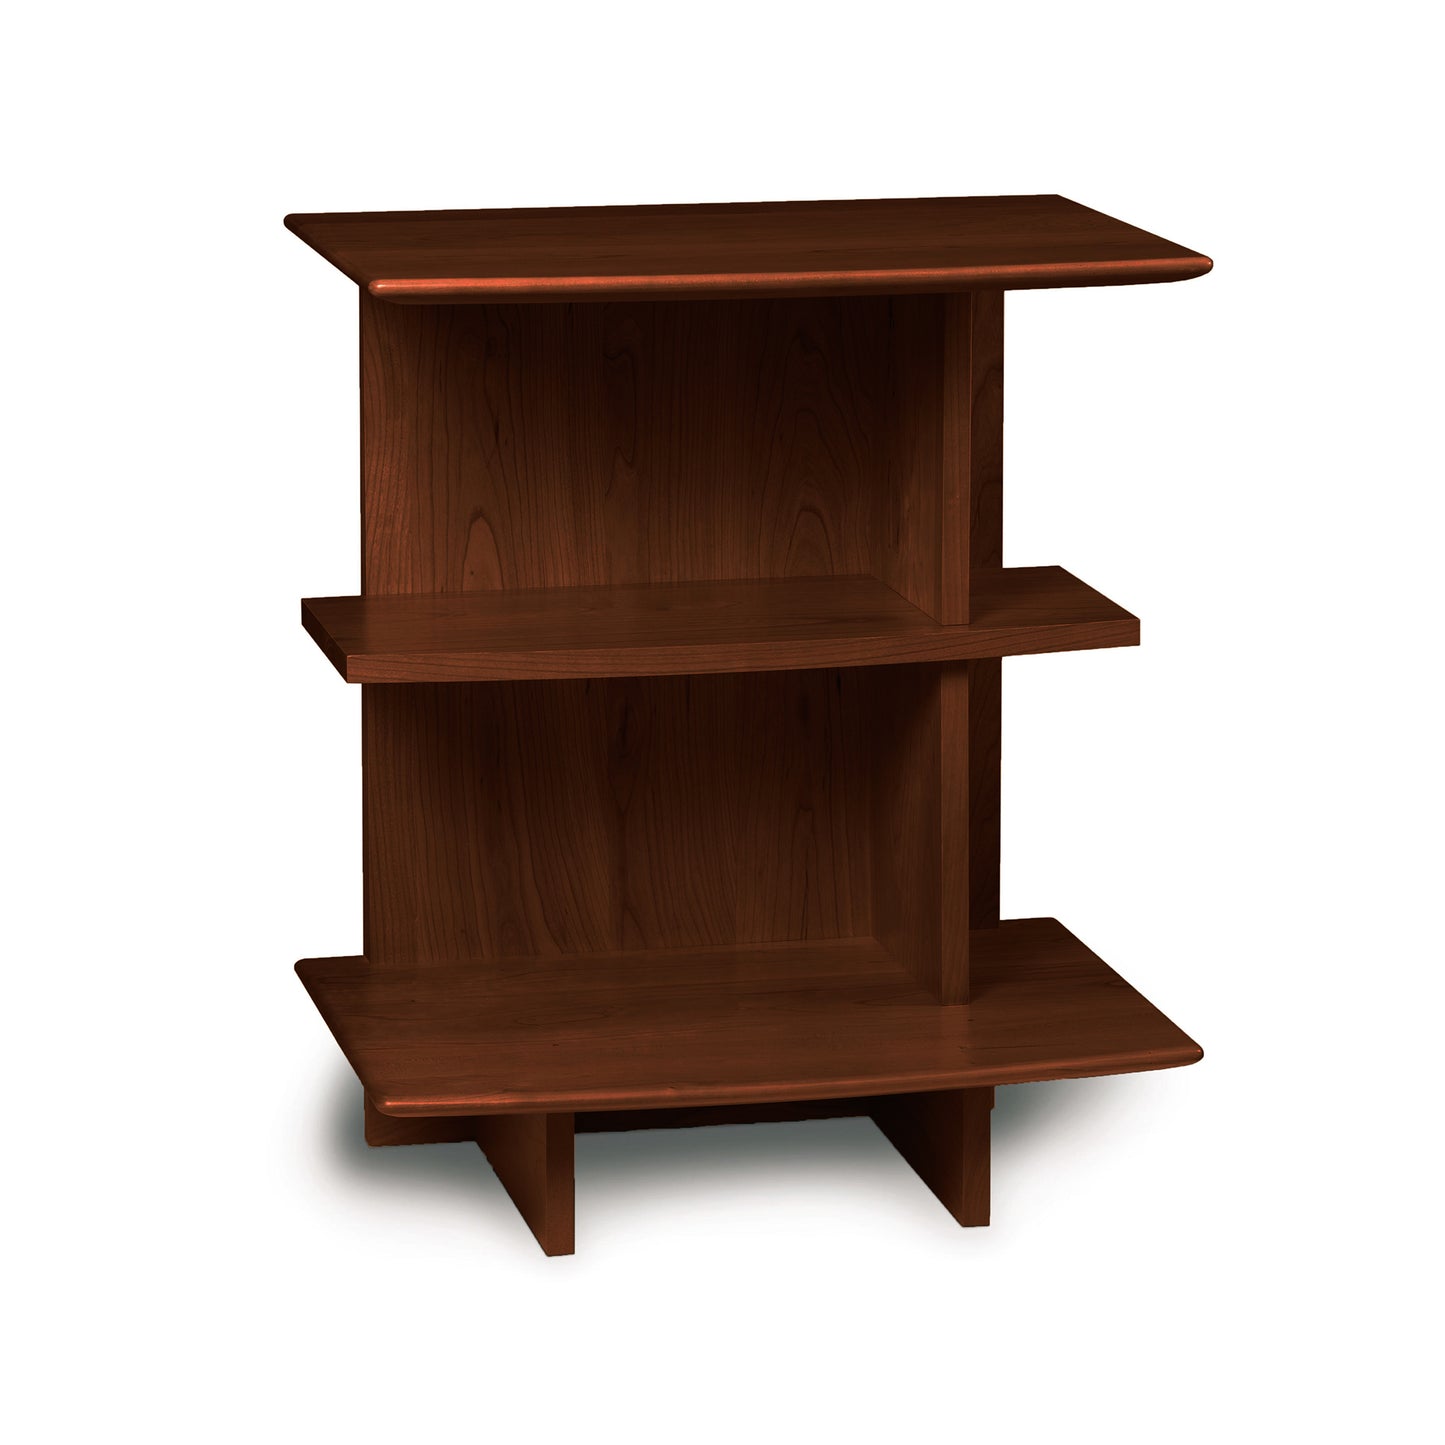 A Copeland Furniture Sarah Open Shelf Nightstand with three tiers, isolated on a white background.